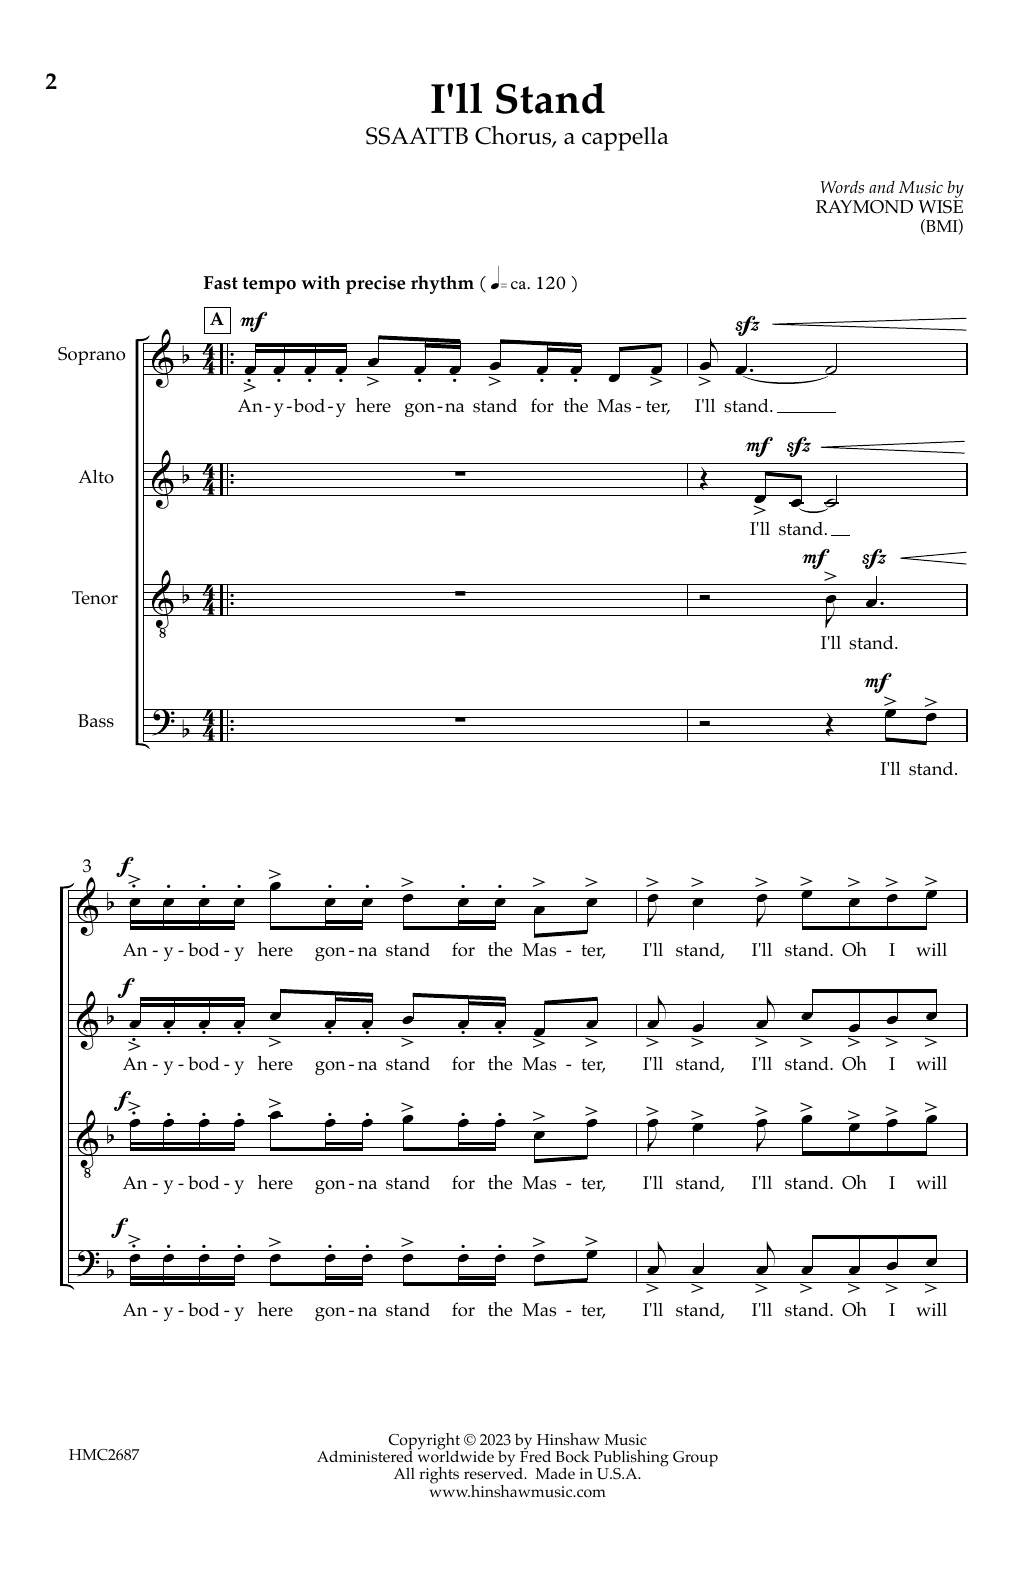 Download Raymond Wise I'll Stand Sheet Music